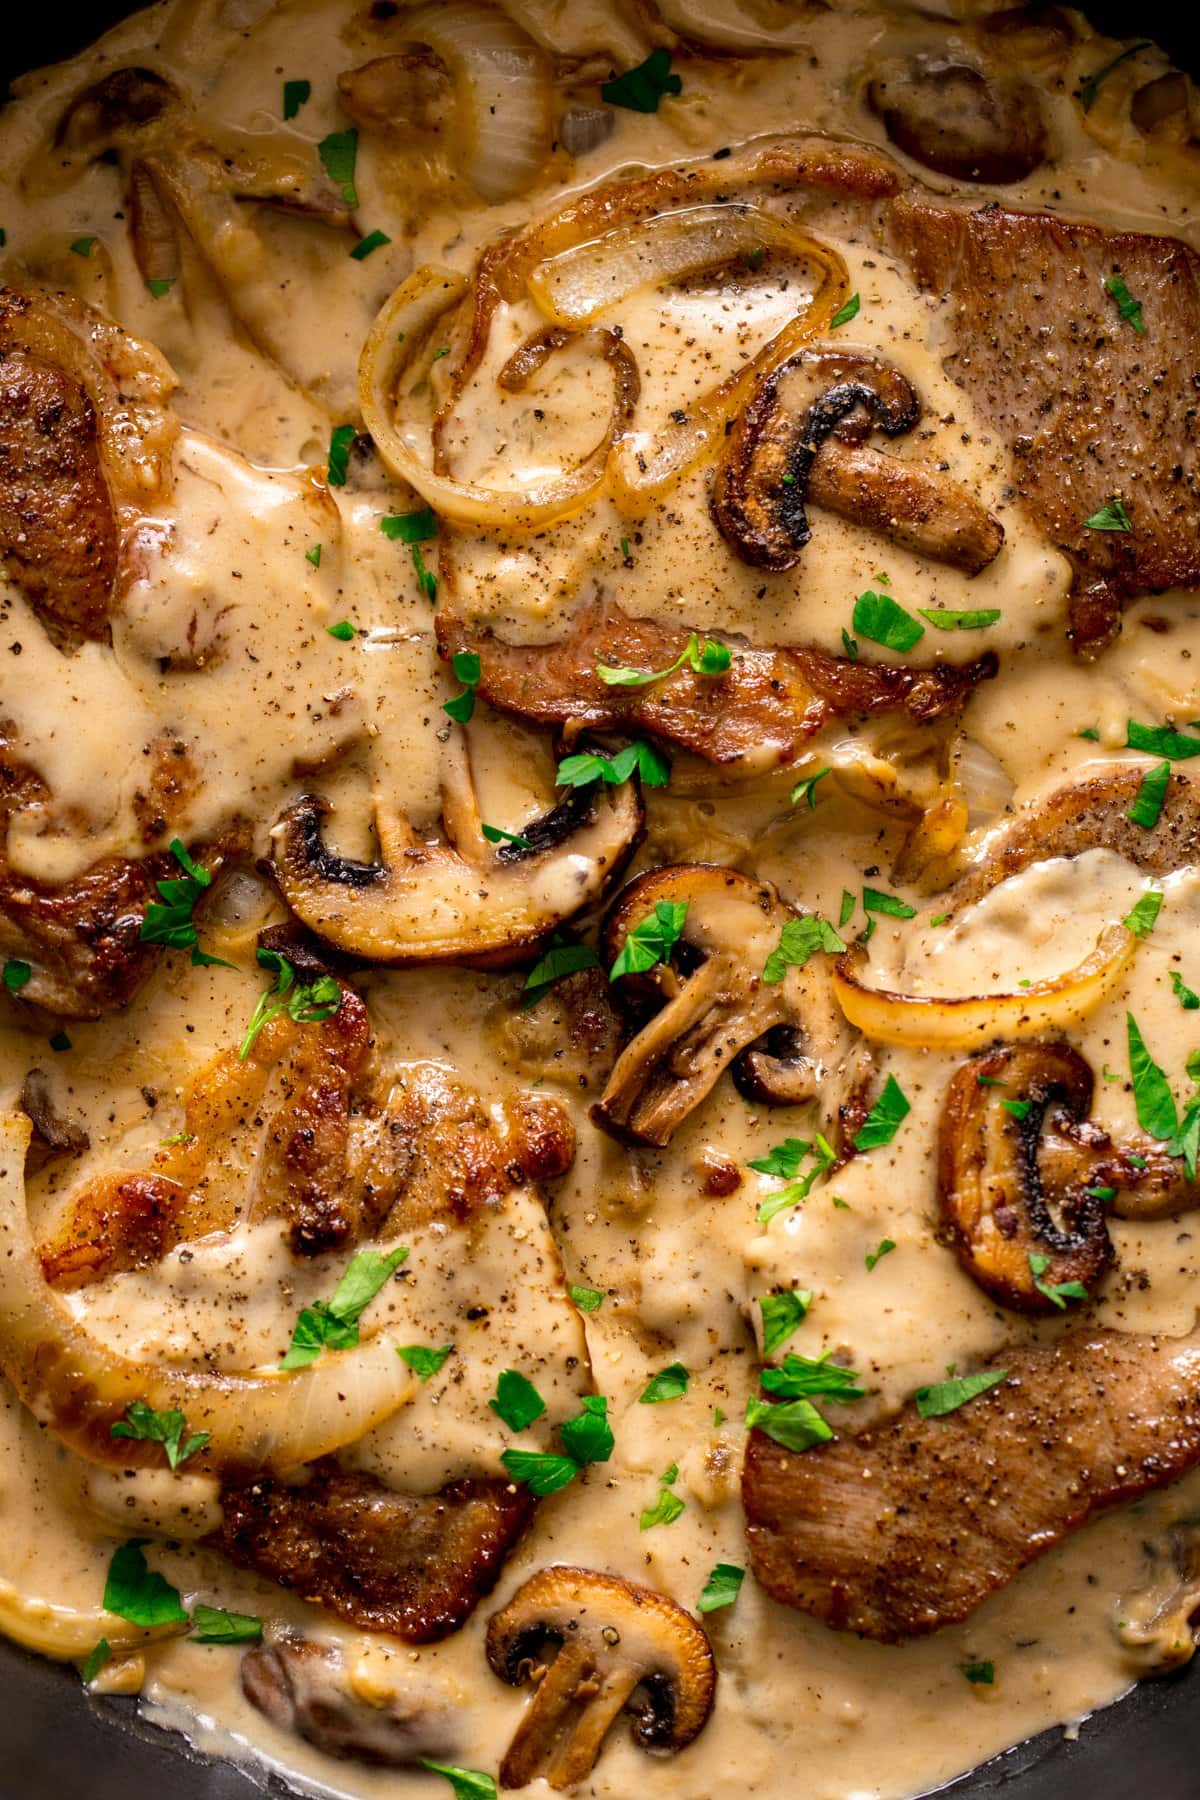 Overhead of pork steak in a cream sauce with mushrooms and onions.